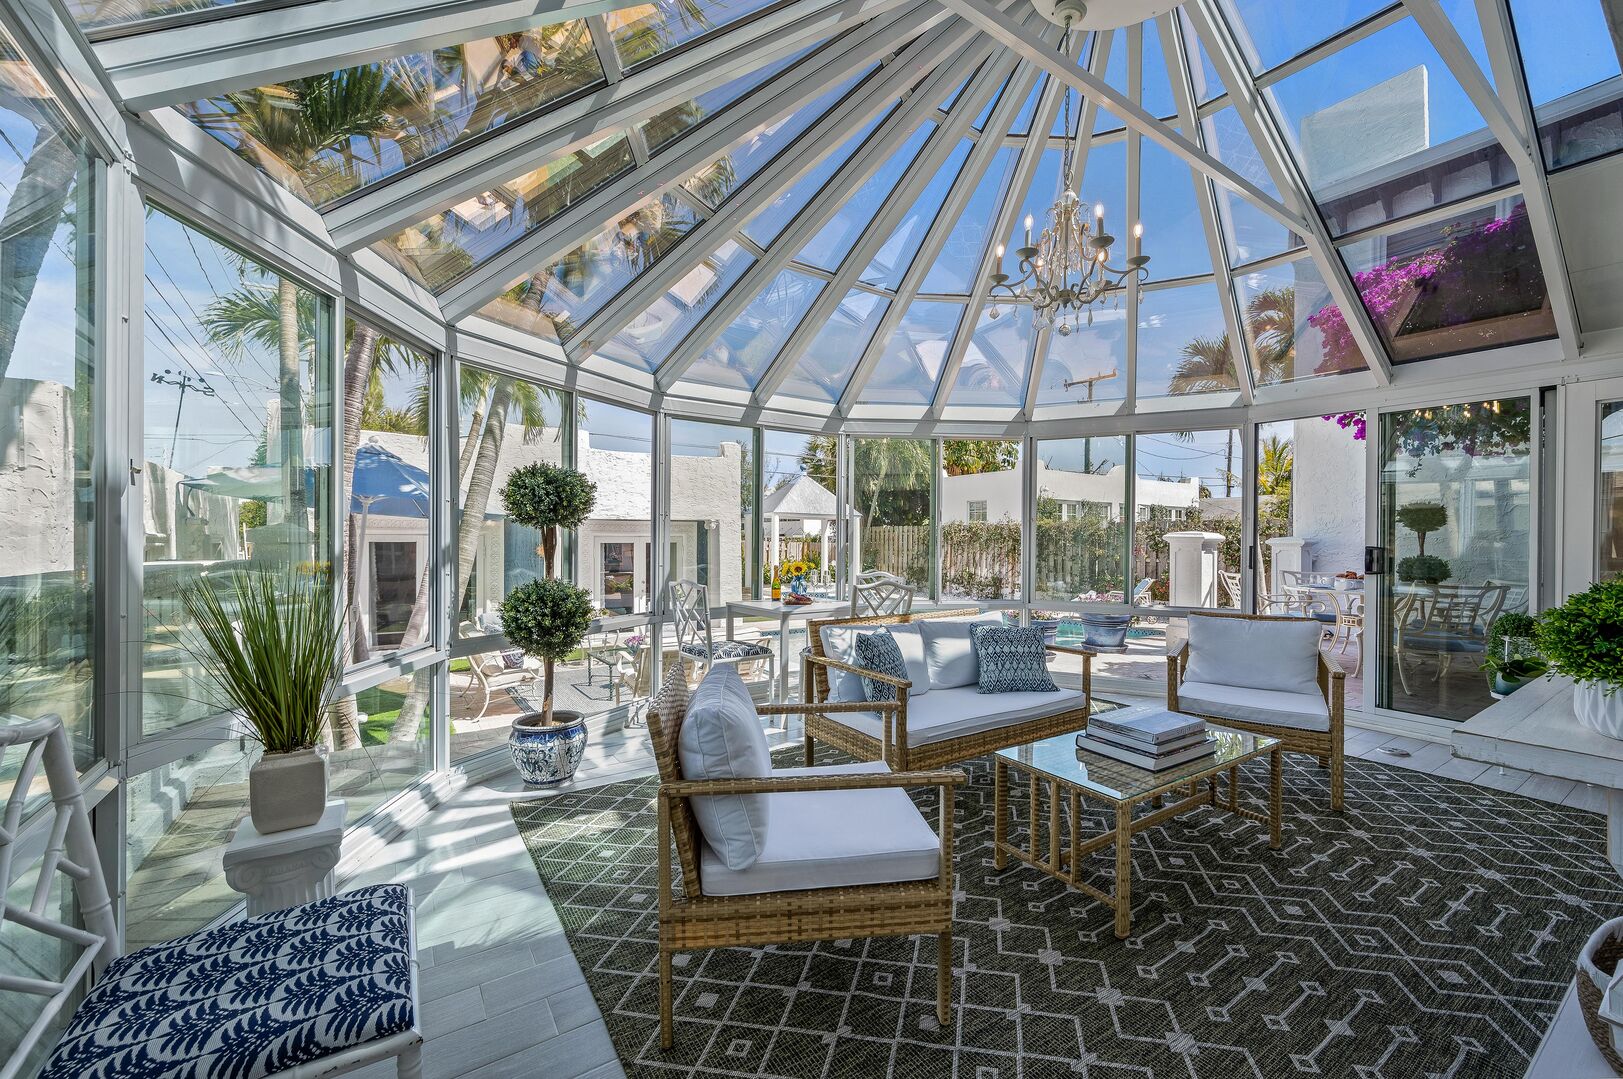 Basking in the warmth of the sunroom, where relaxation and natural light come together in perfect harmony.